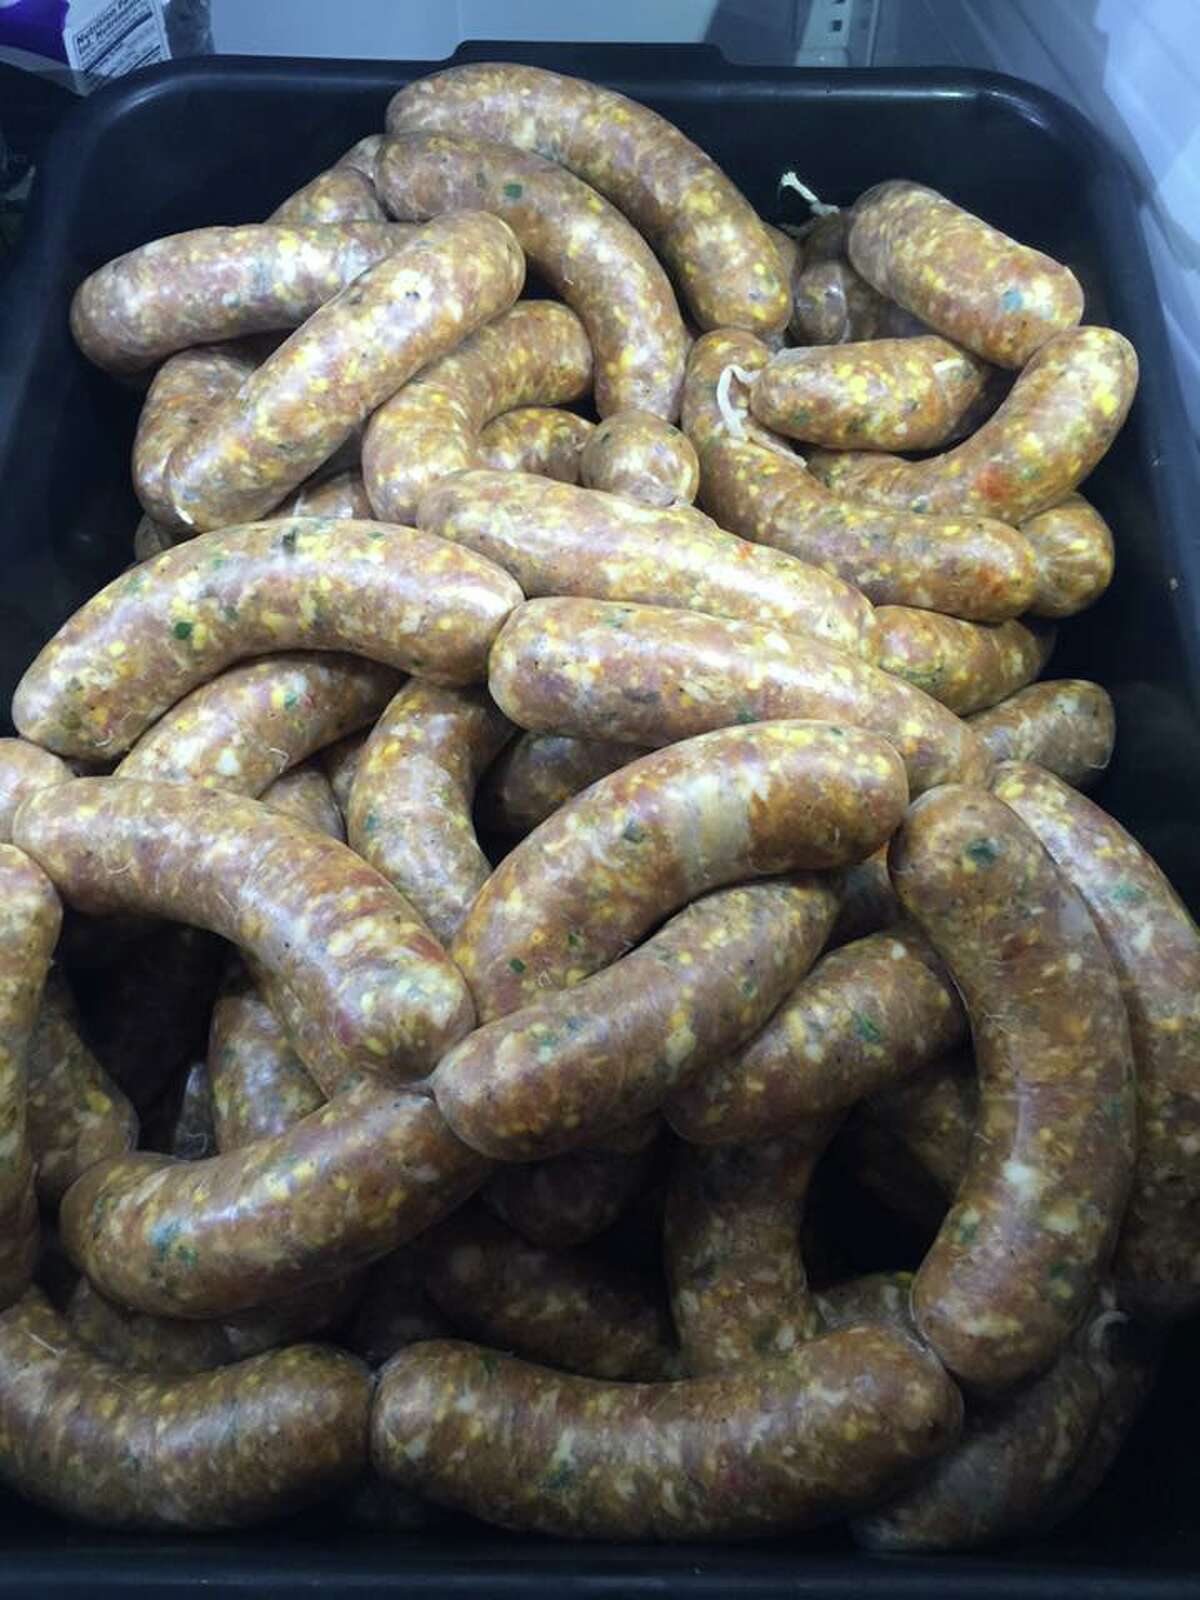 John Avila created this sausage for a pop-up at at Luke's Icehouse.